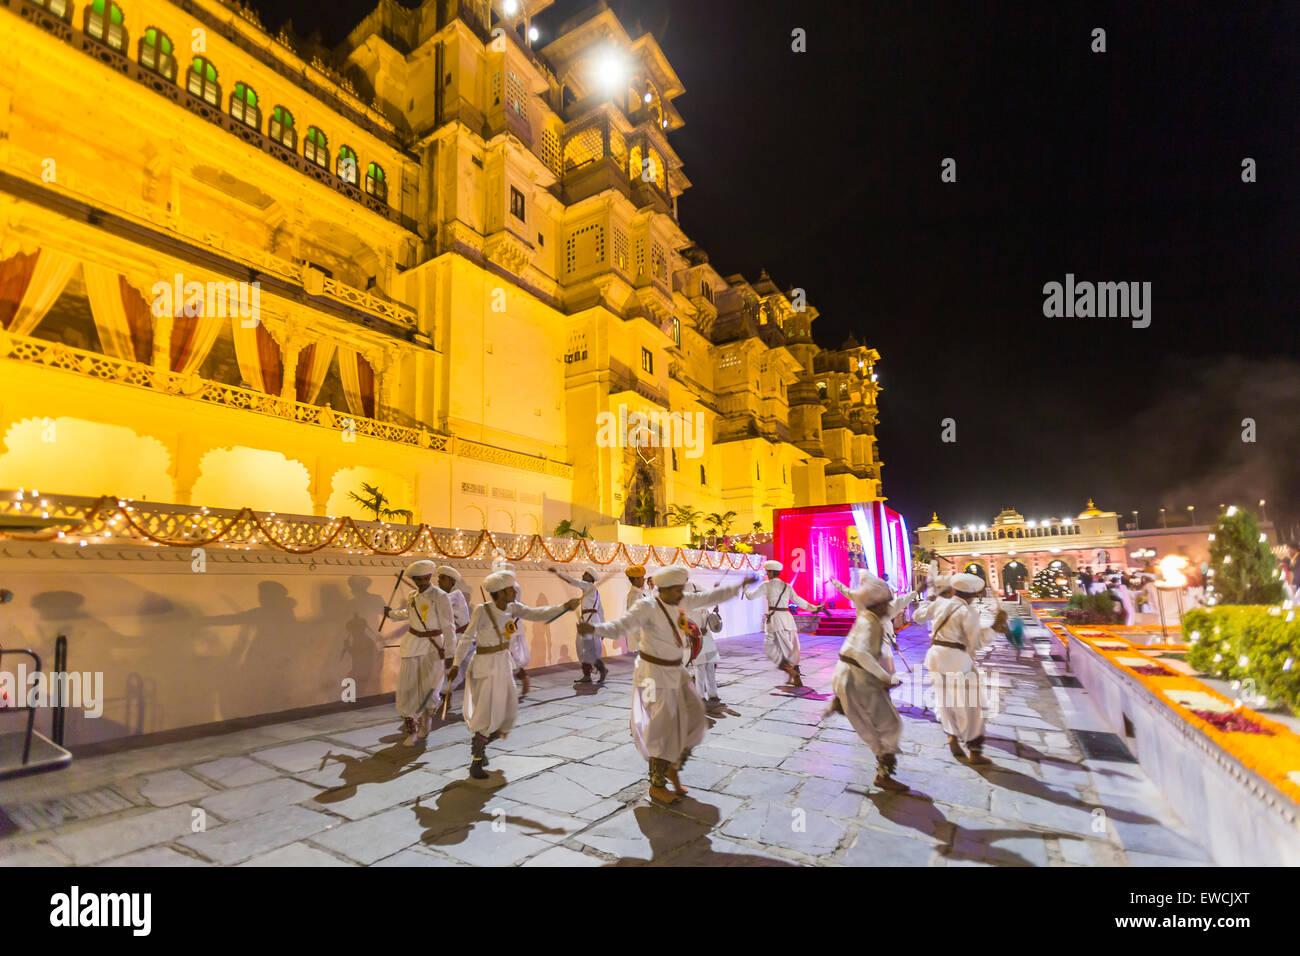 Gira dance performed at the Holi festival at the City Palace, Udaipur, India Stock Photo